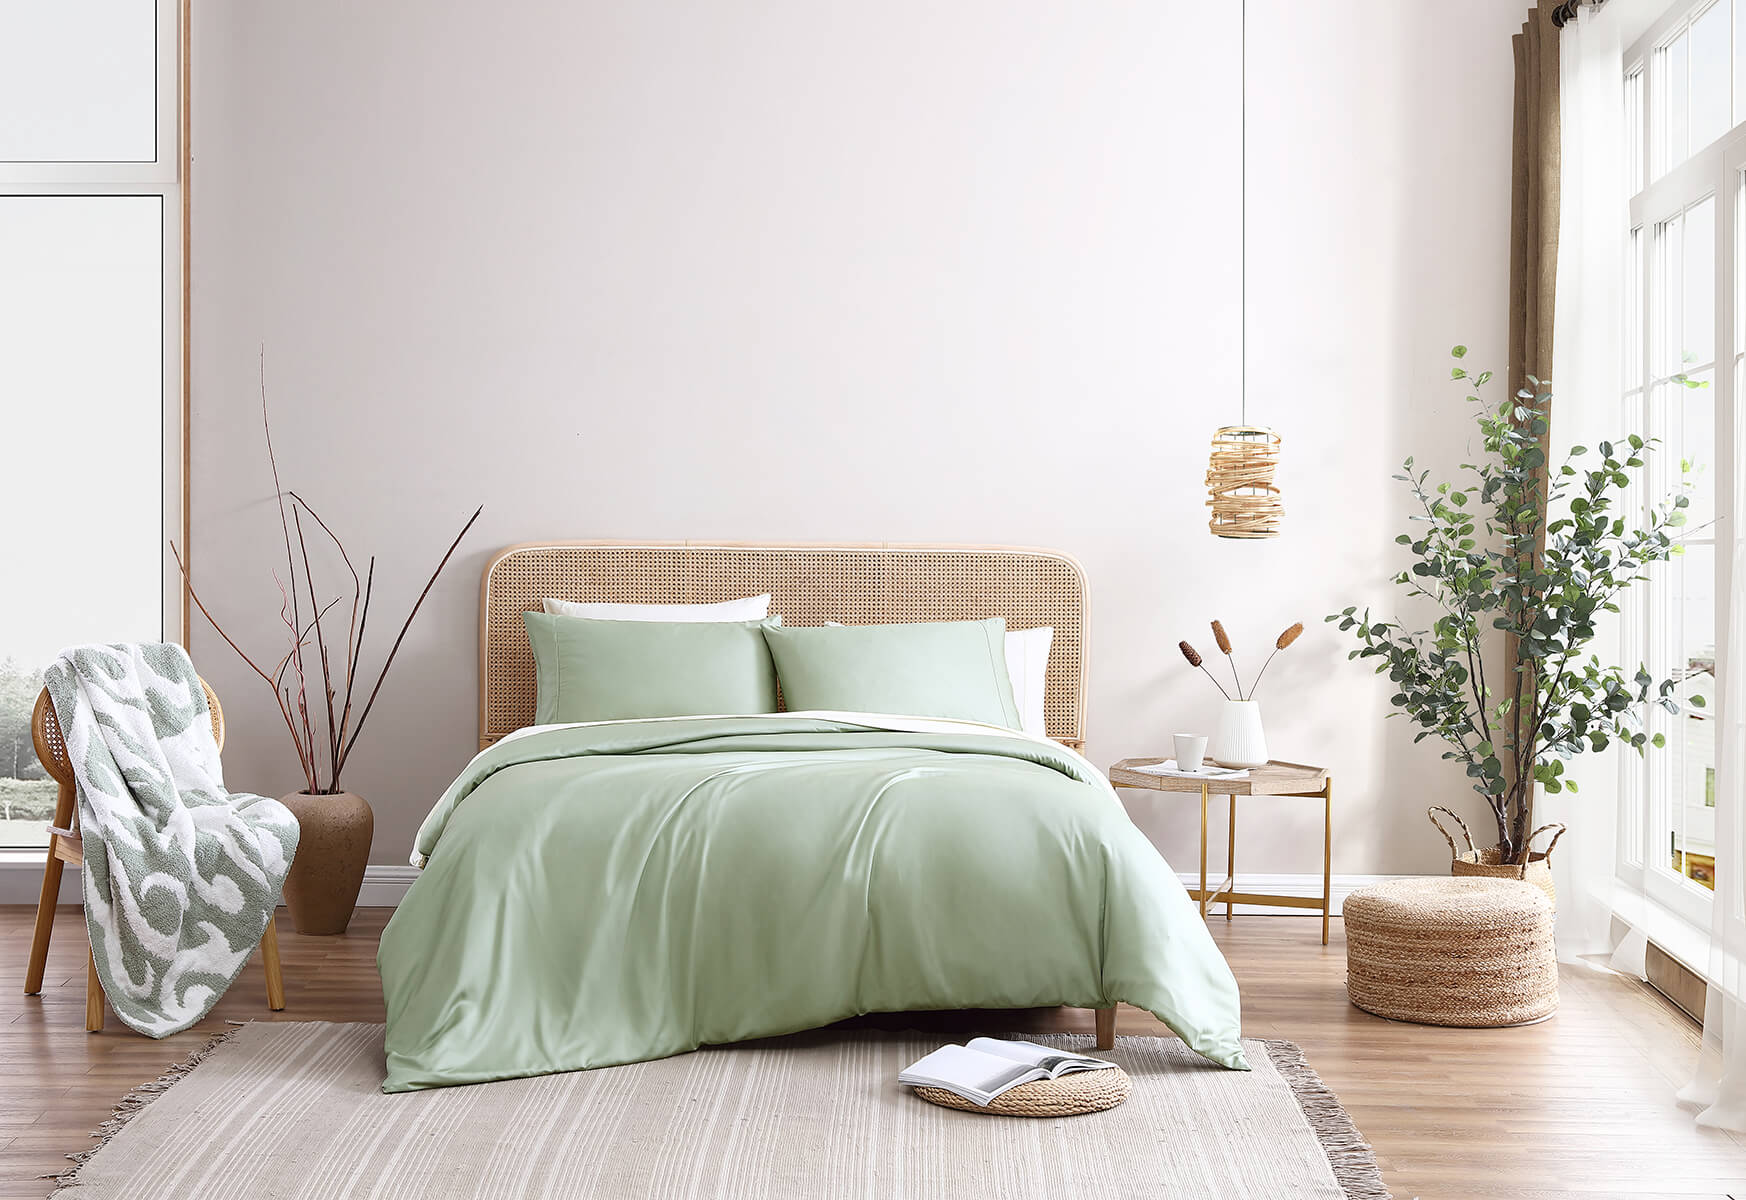 Bamboo Bedding: Sunday Citizen creates beautiful Bamboo Sheets and Bamboo Duvets covers for your Room and Home Decor. 